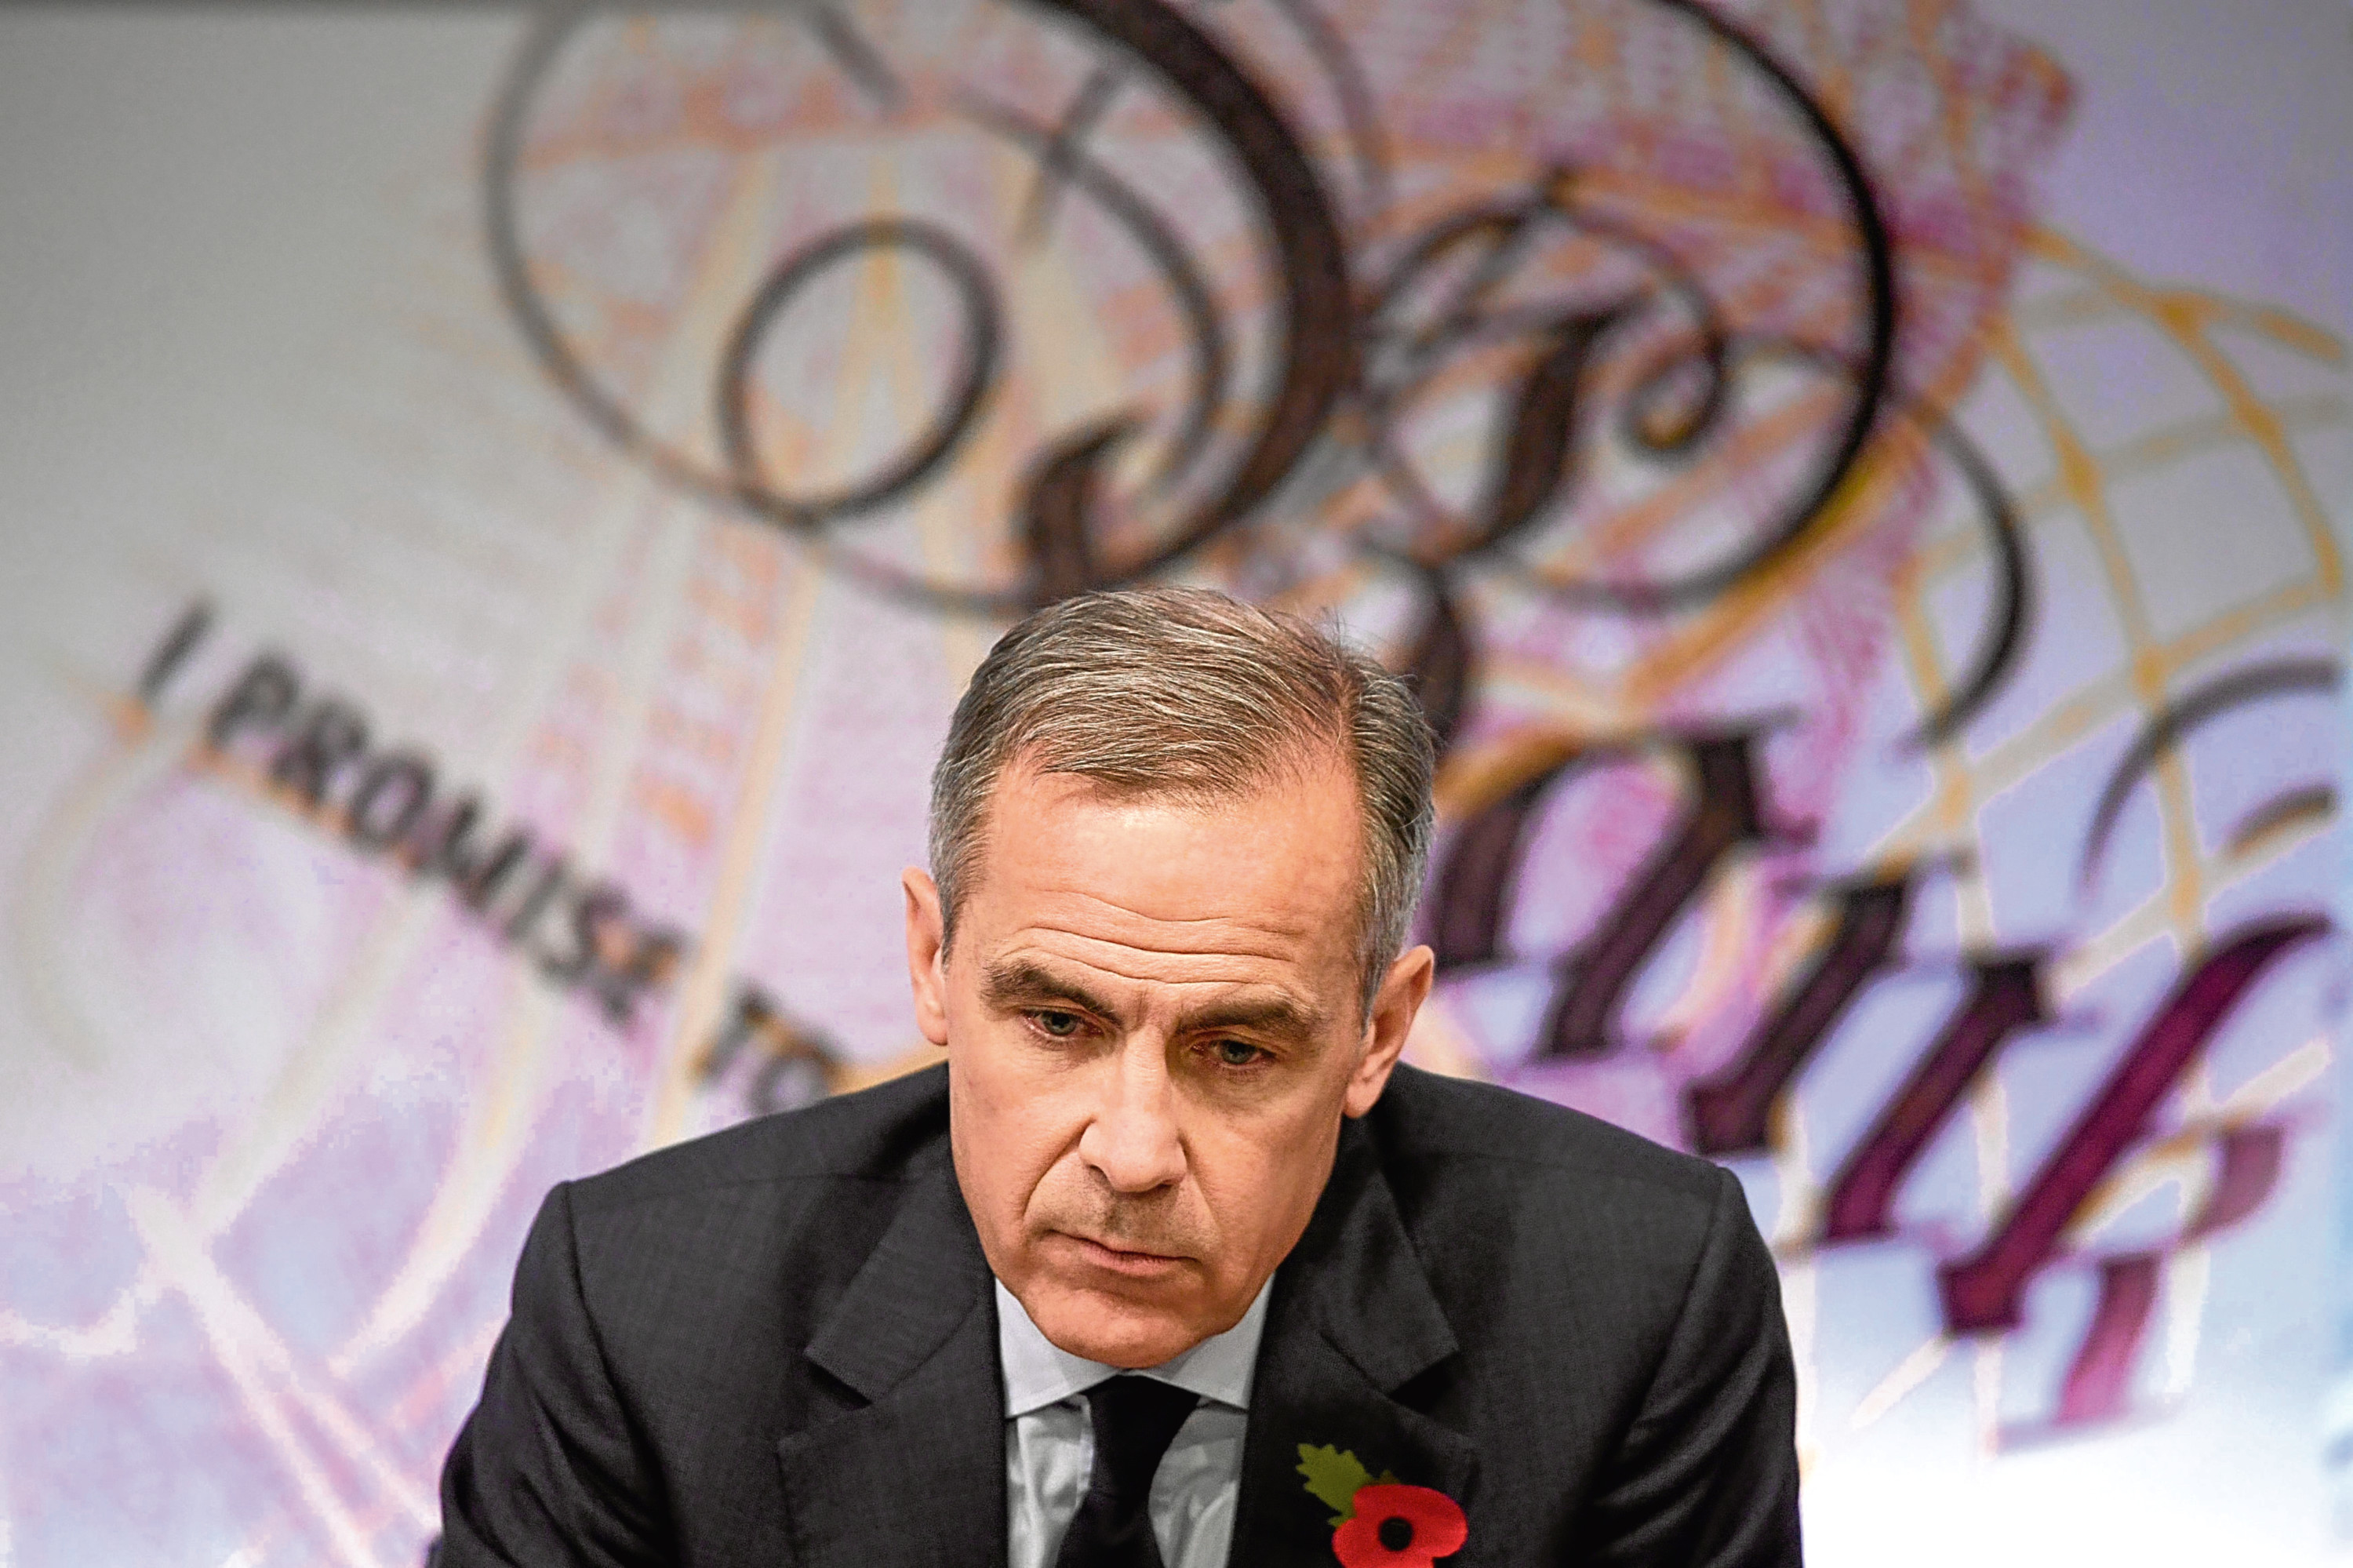 The governor of the Bank of England Mark Carney during the announcement of the Bank of England quarterly Inflation Report and interest rate decision